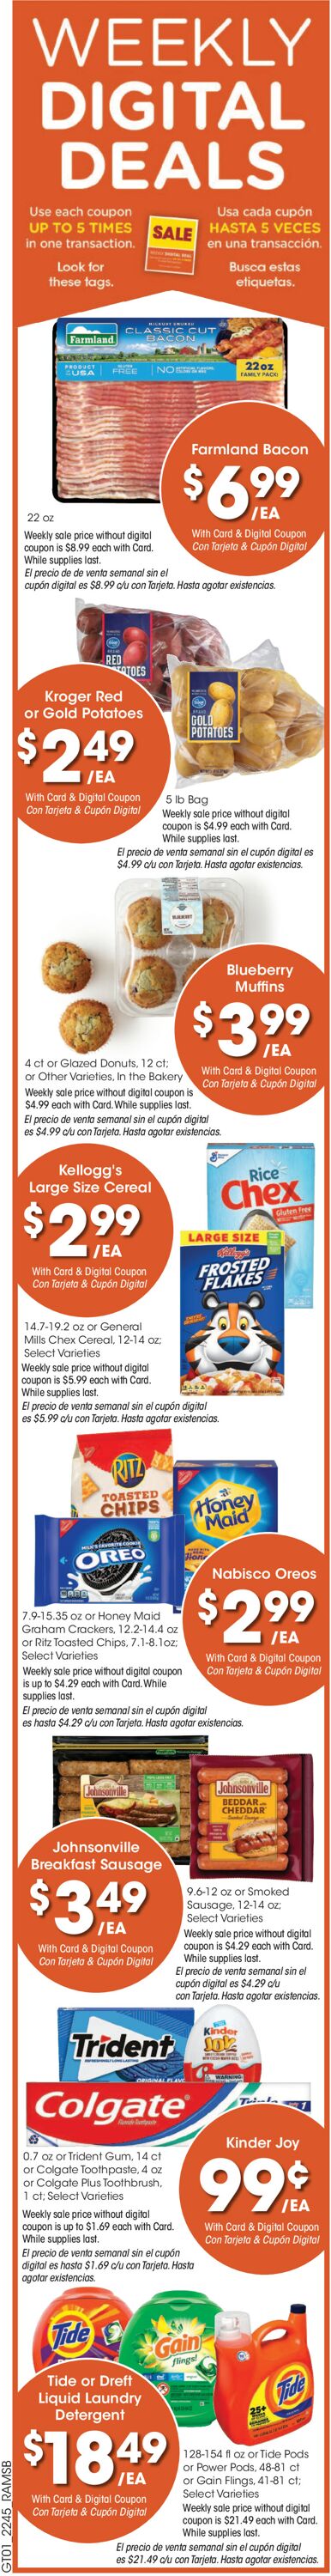 Ralphs Ad from 12/07/2022